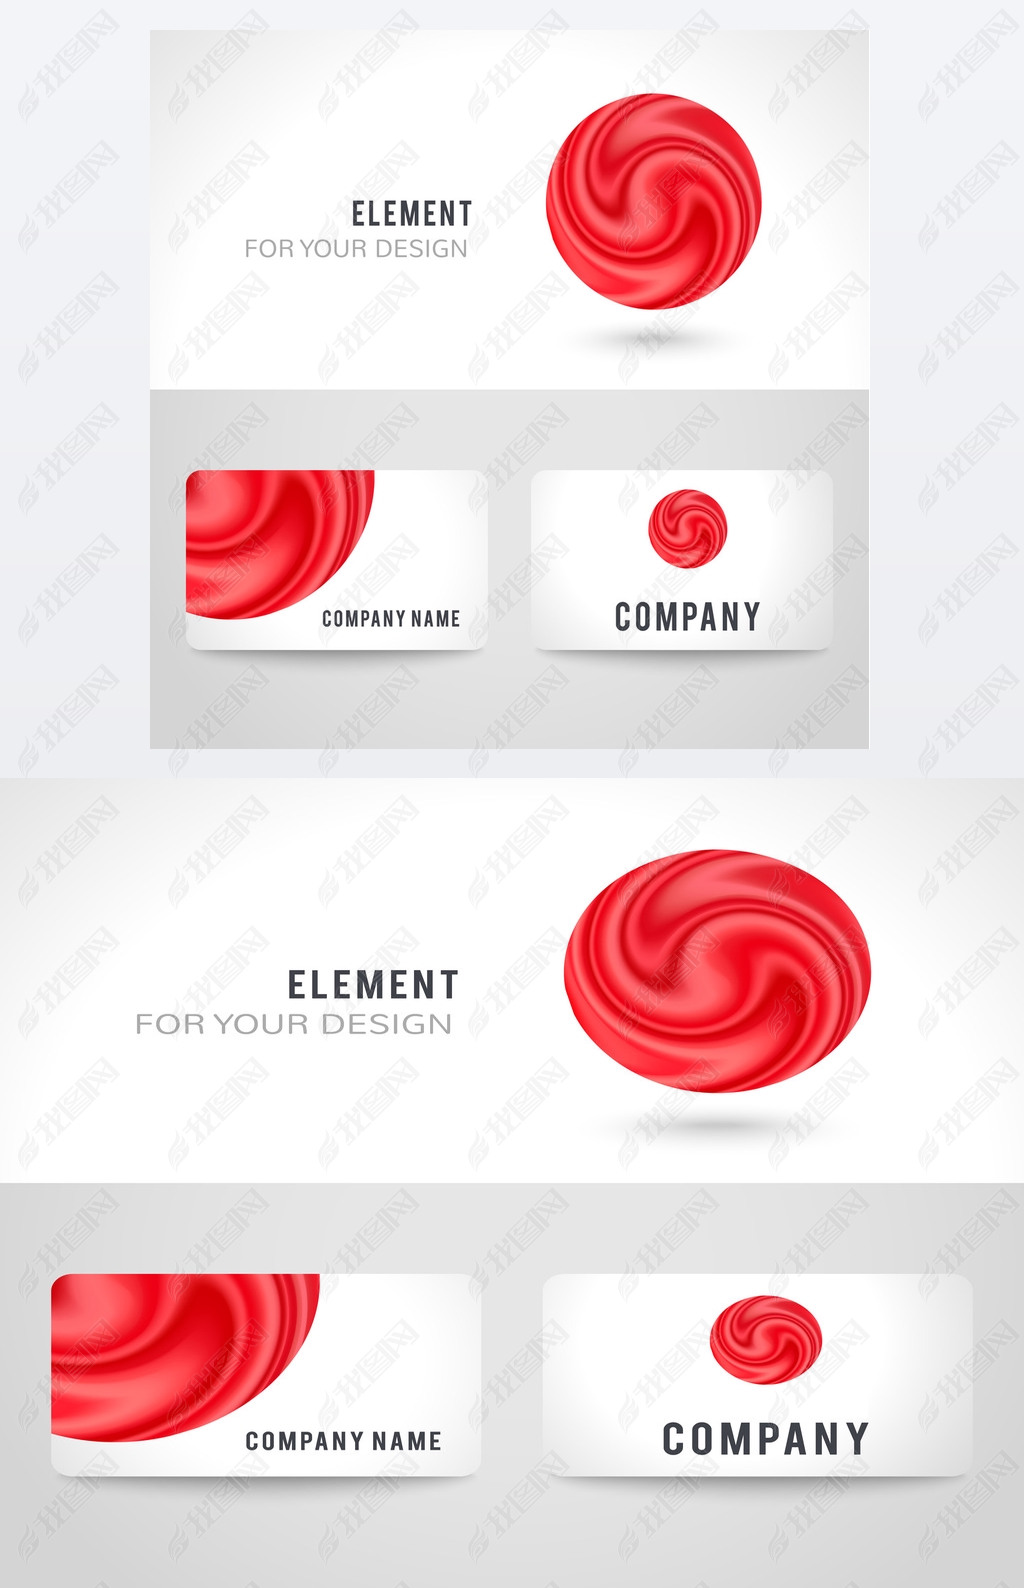 Business card template set, abstract red circle background. illustration